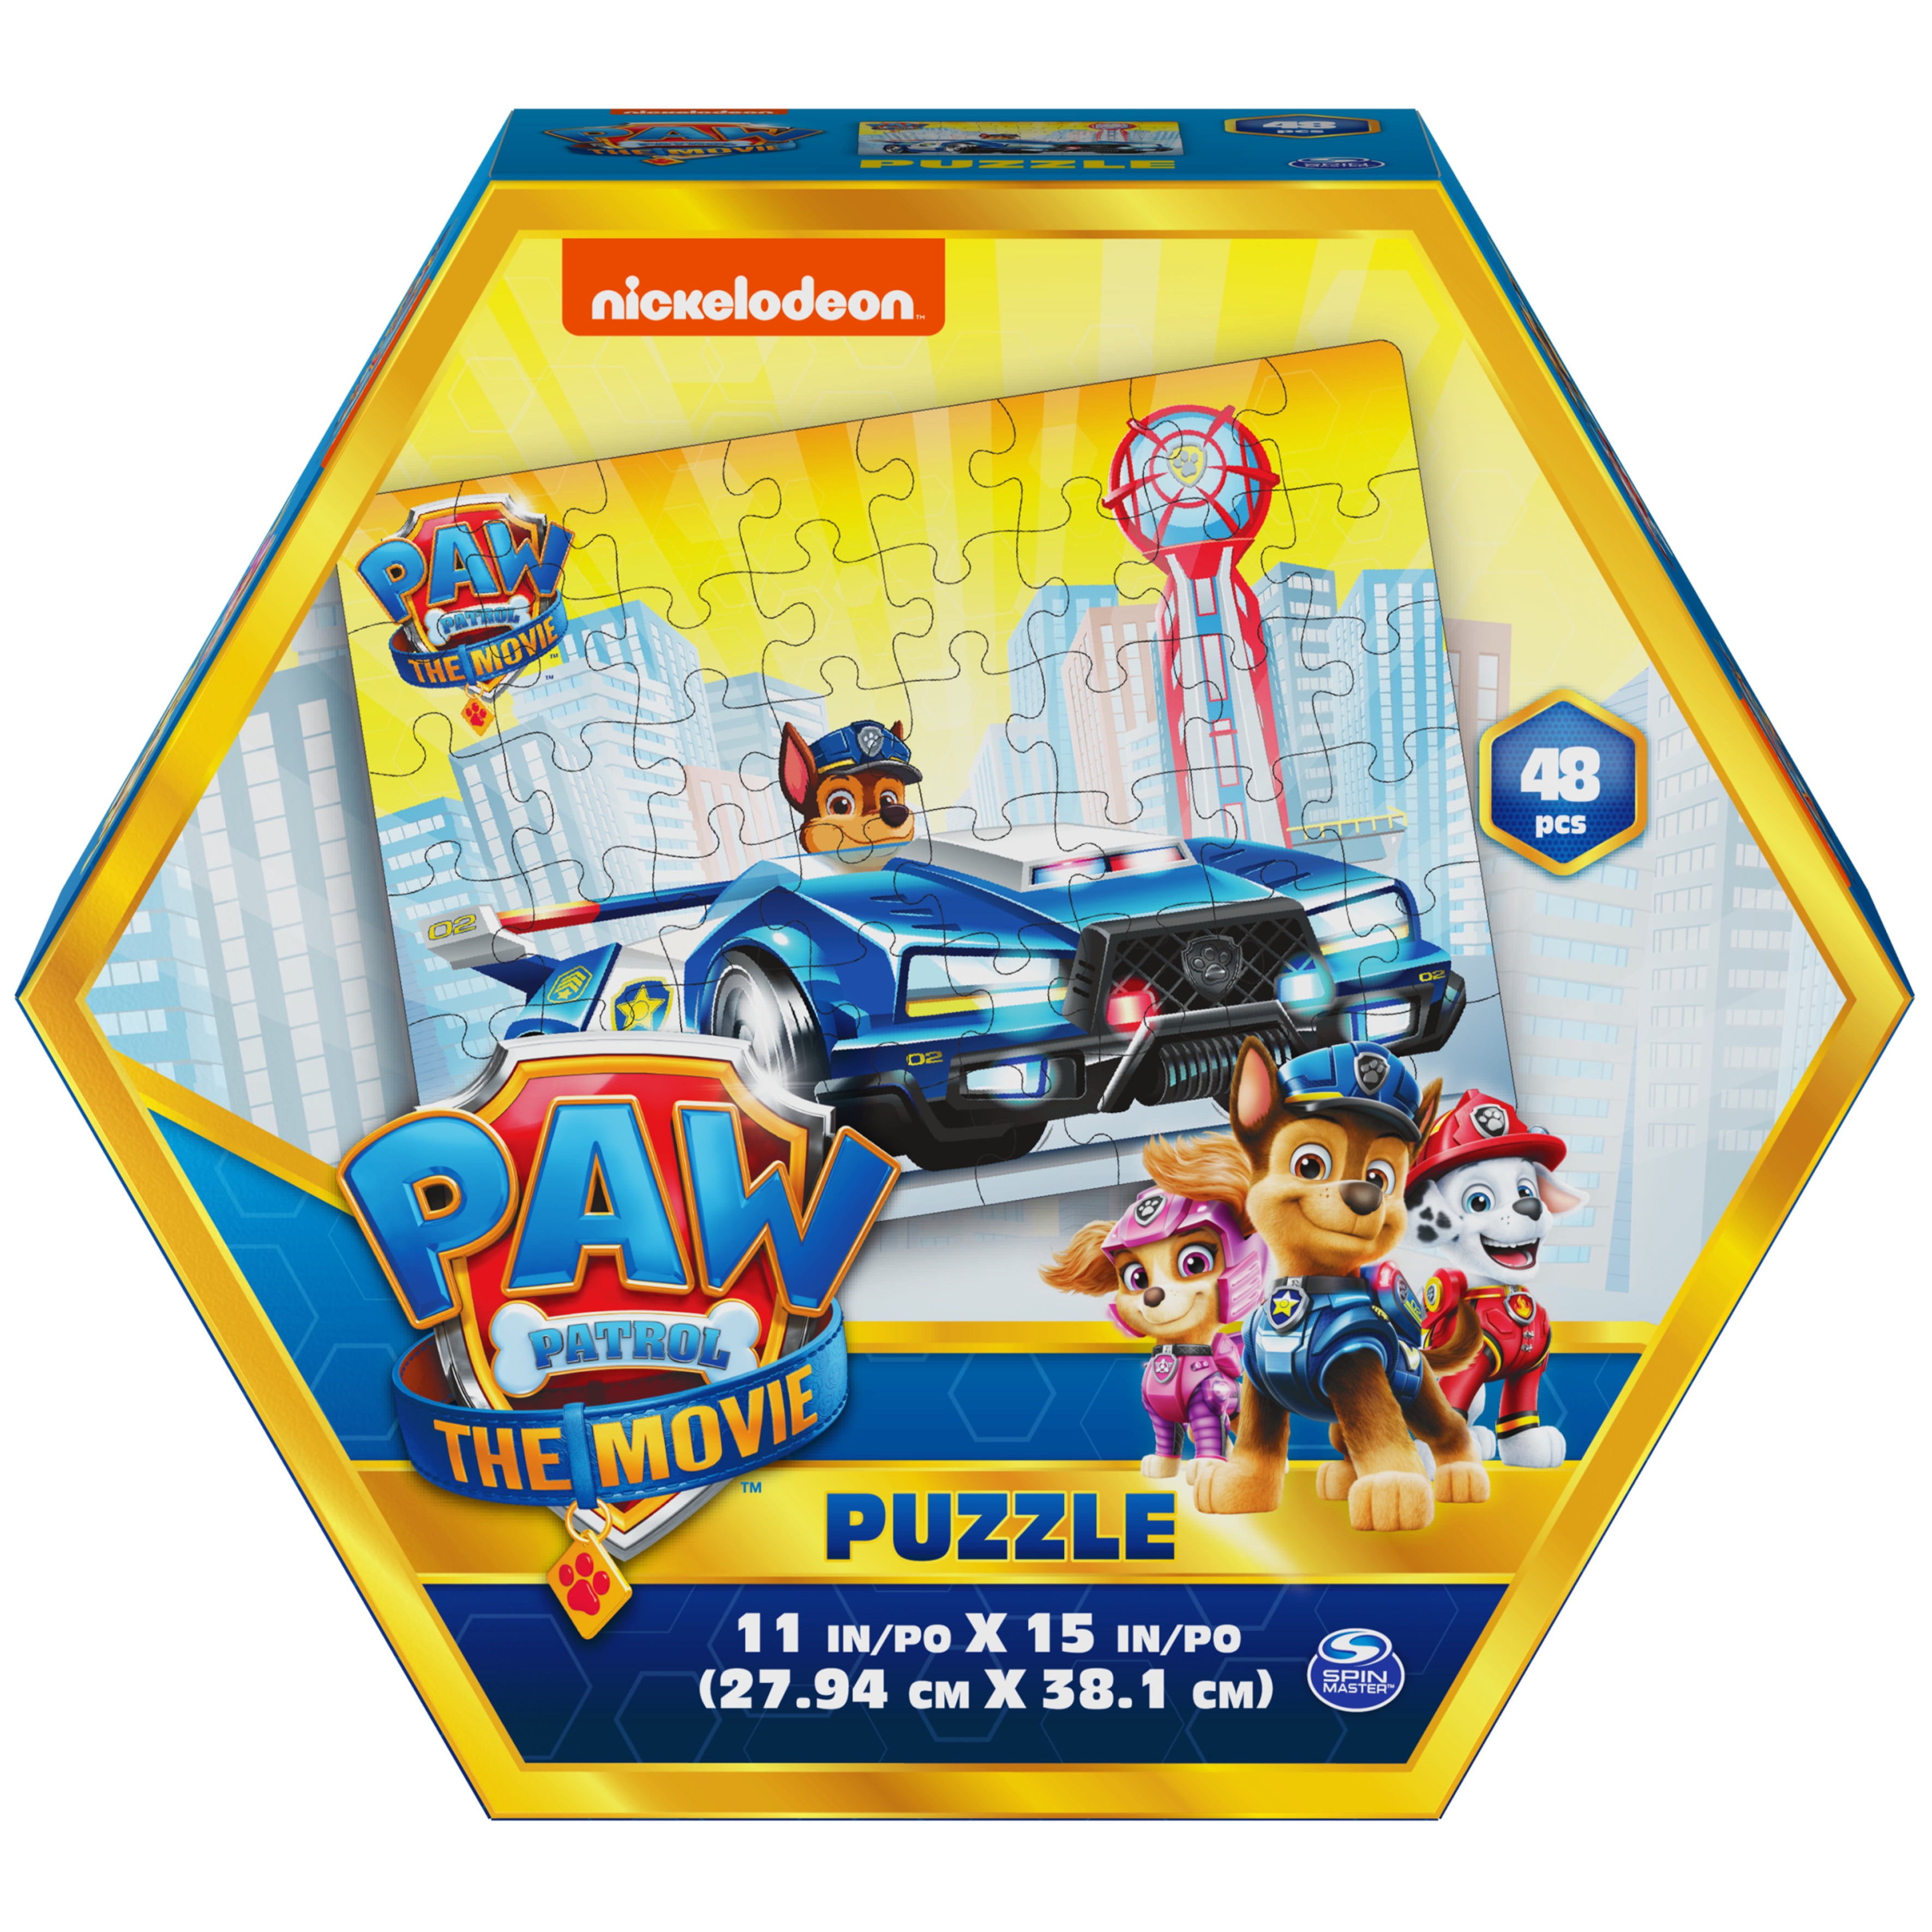 Official 30 x 42 cm Pink Foldable Toy Box Paw Patrol 